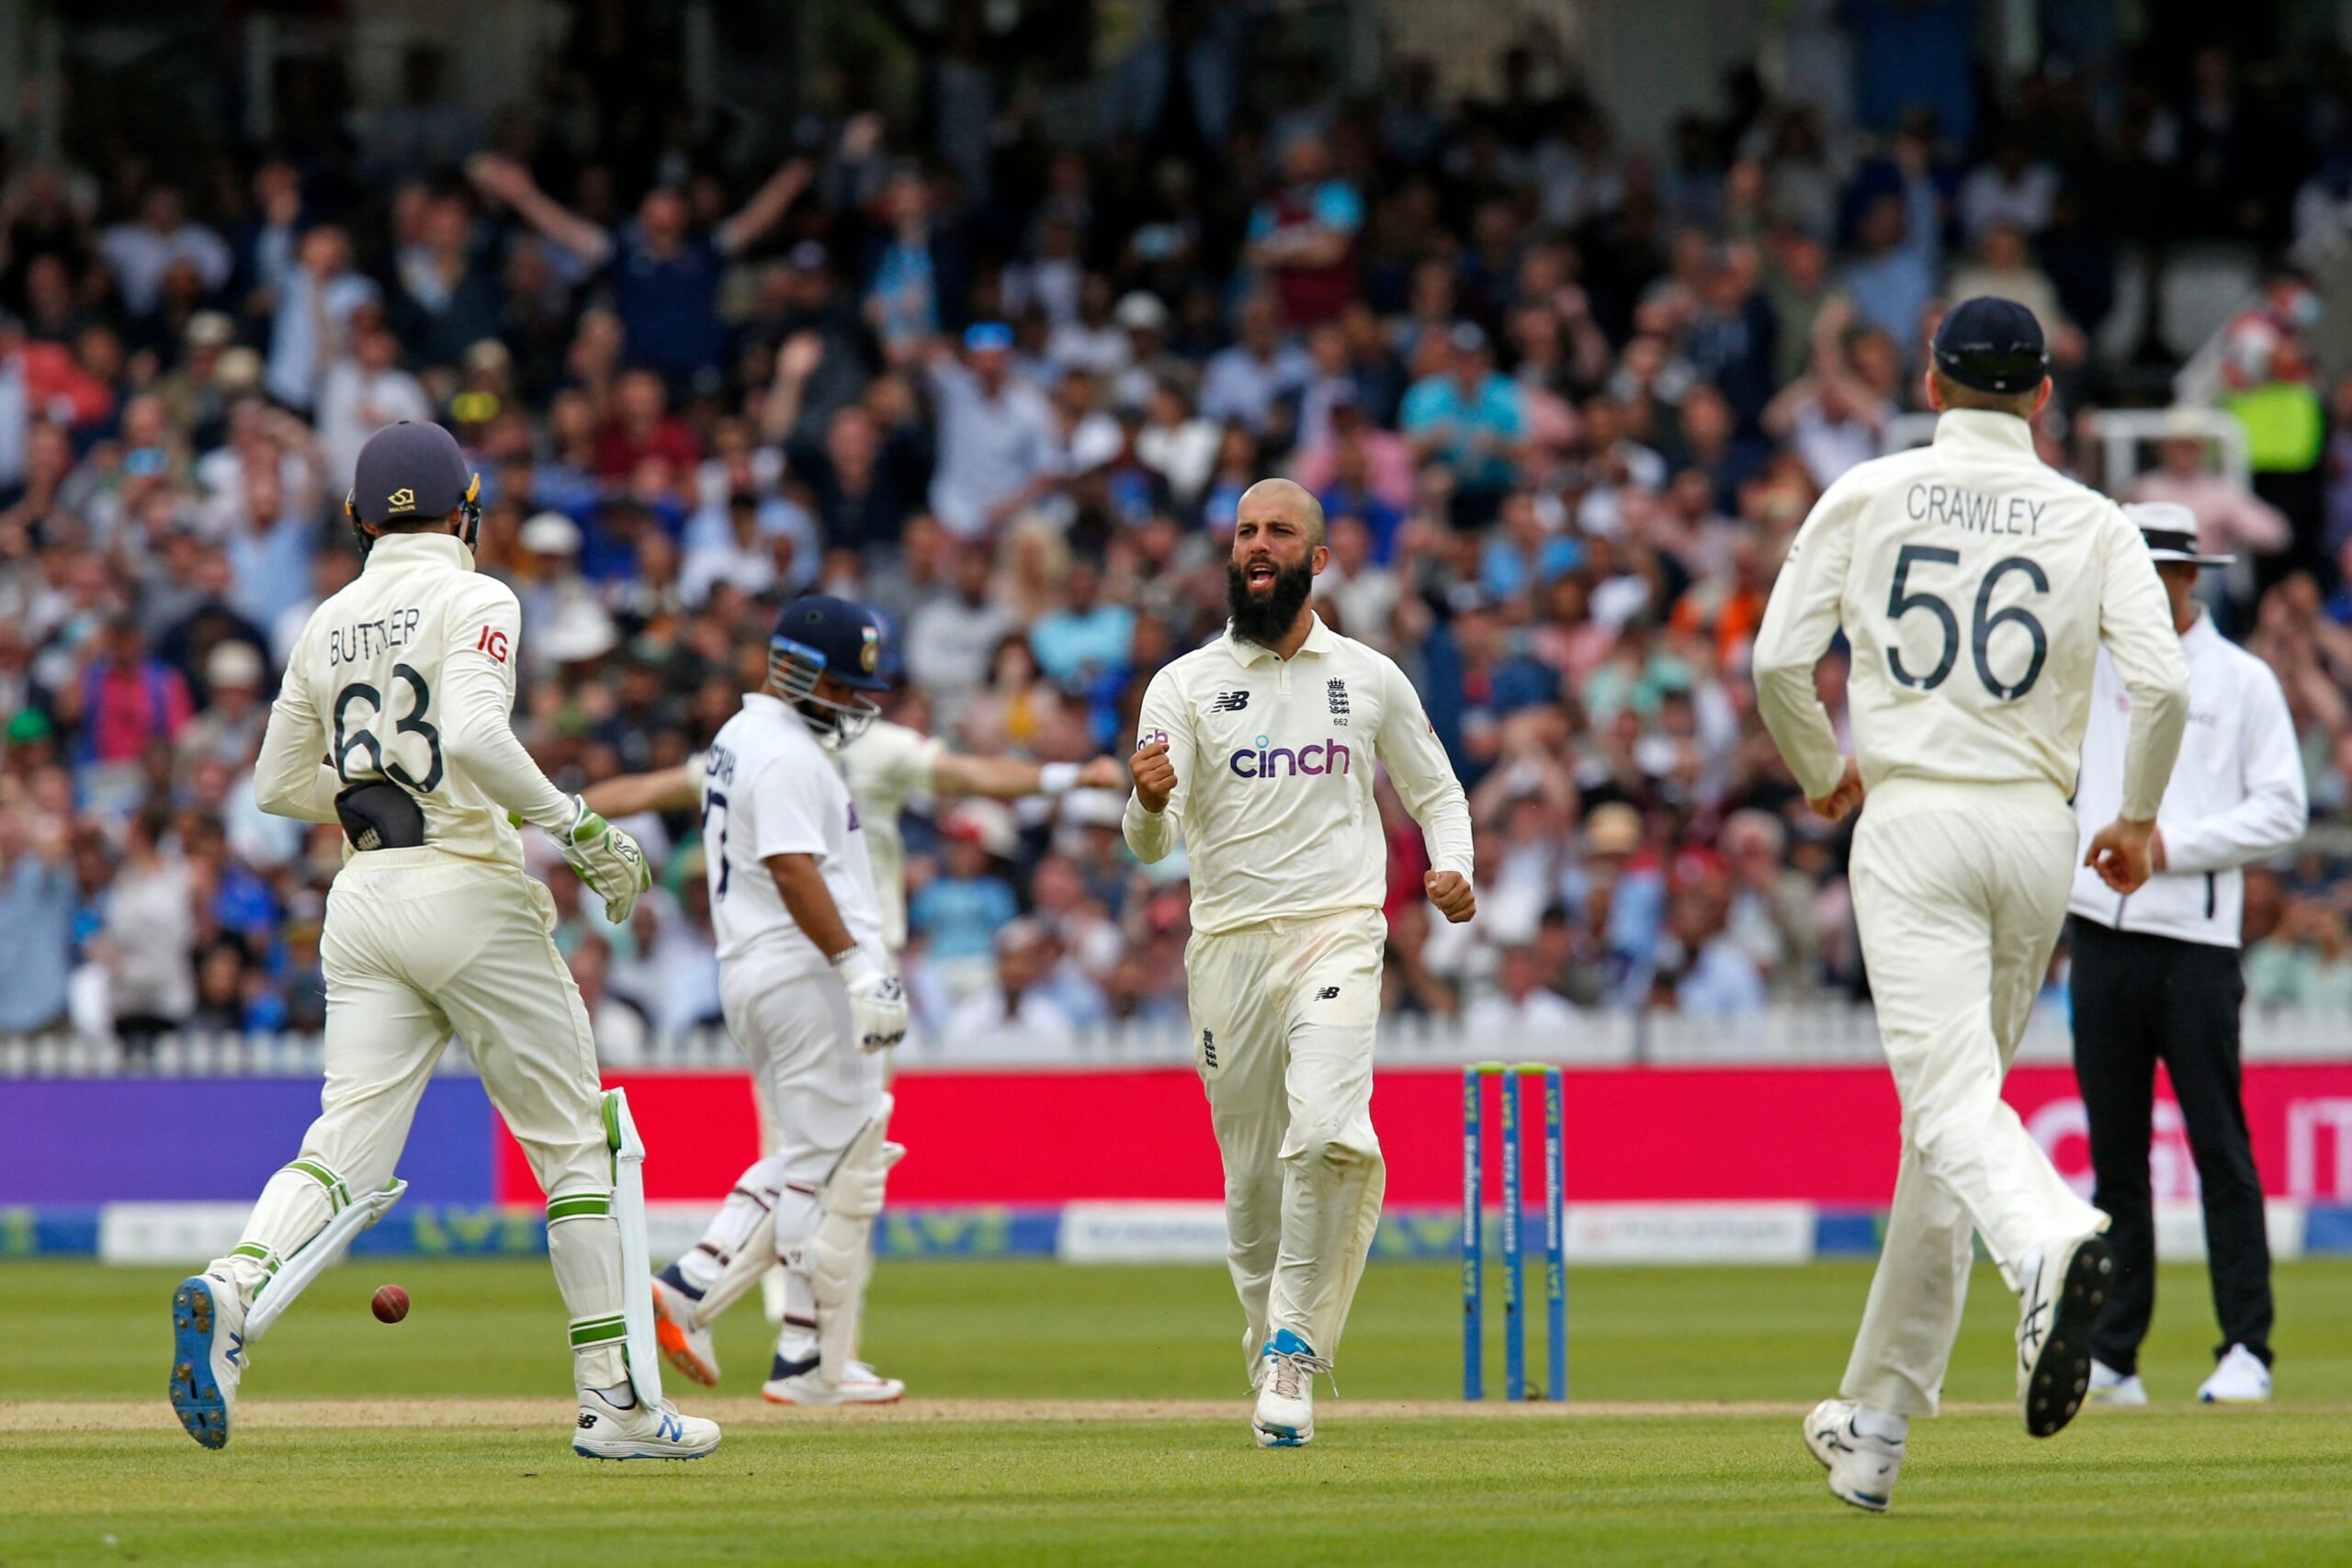 Twitter Reacts As England Take Complete Control Of The 2nd Test As India Lose Six 2nd Innings Wickets